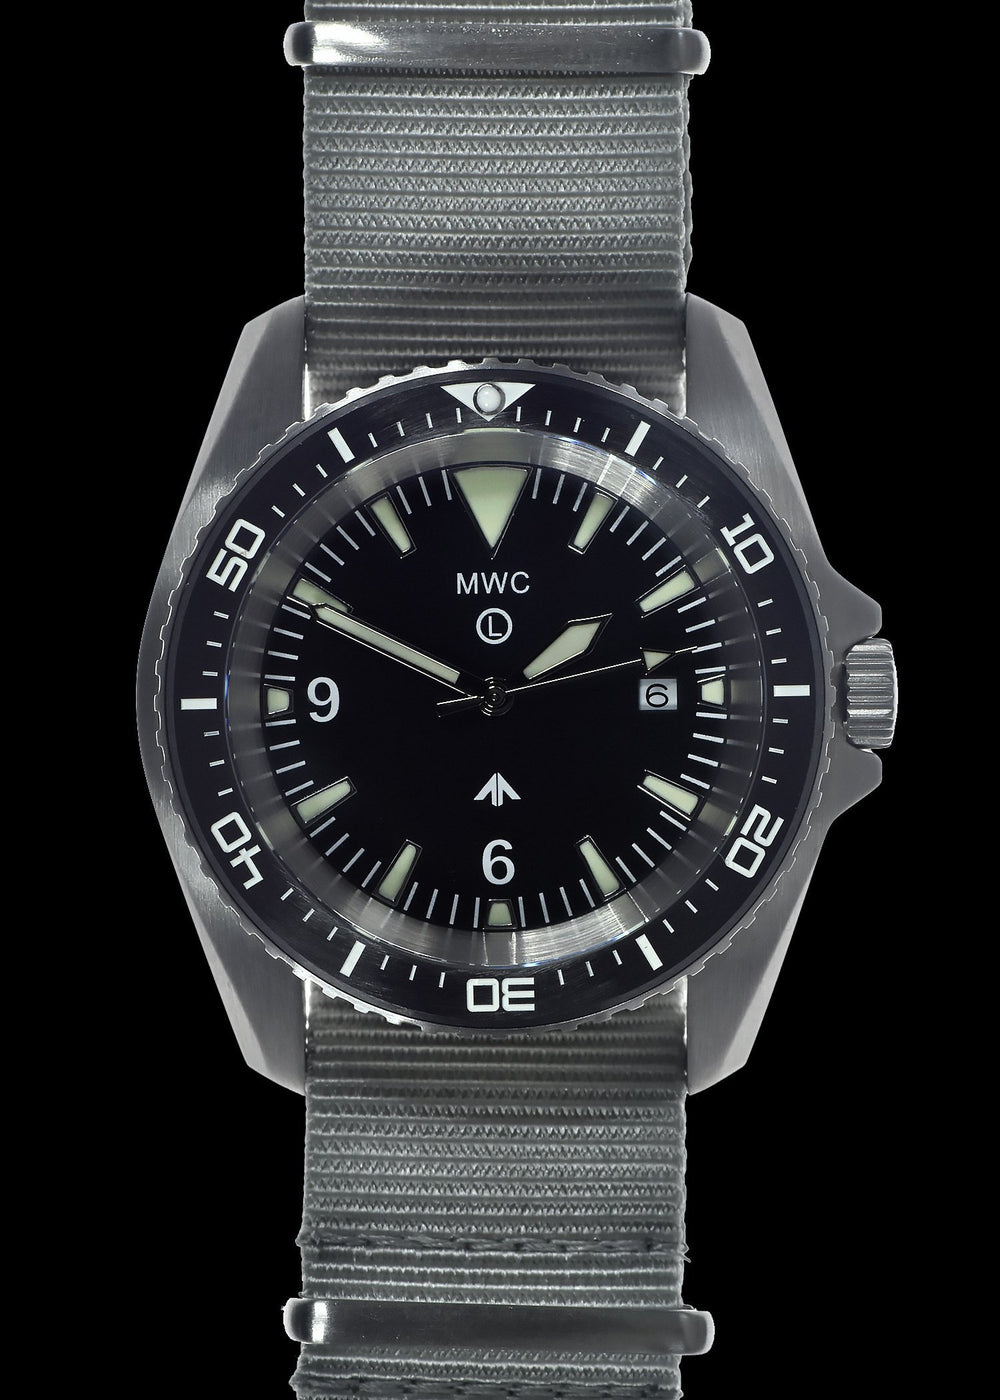 MWC Divers Watch - Military Divers Watch in Stainless Steel Case (Quartz) with Sapphire Crystal and Ceramic Bezel